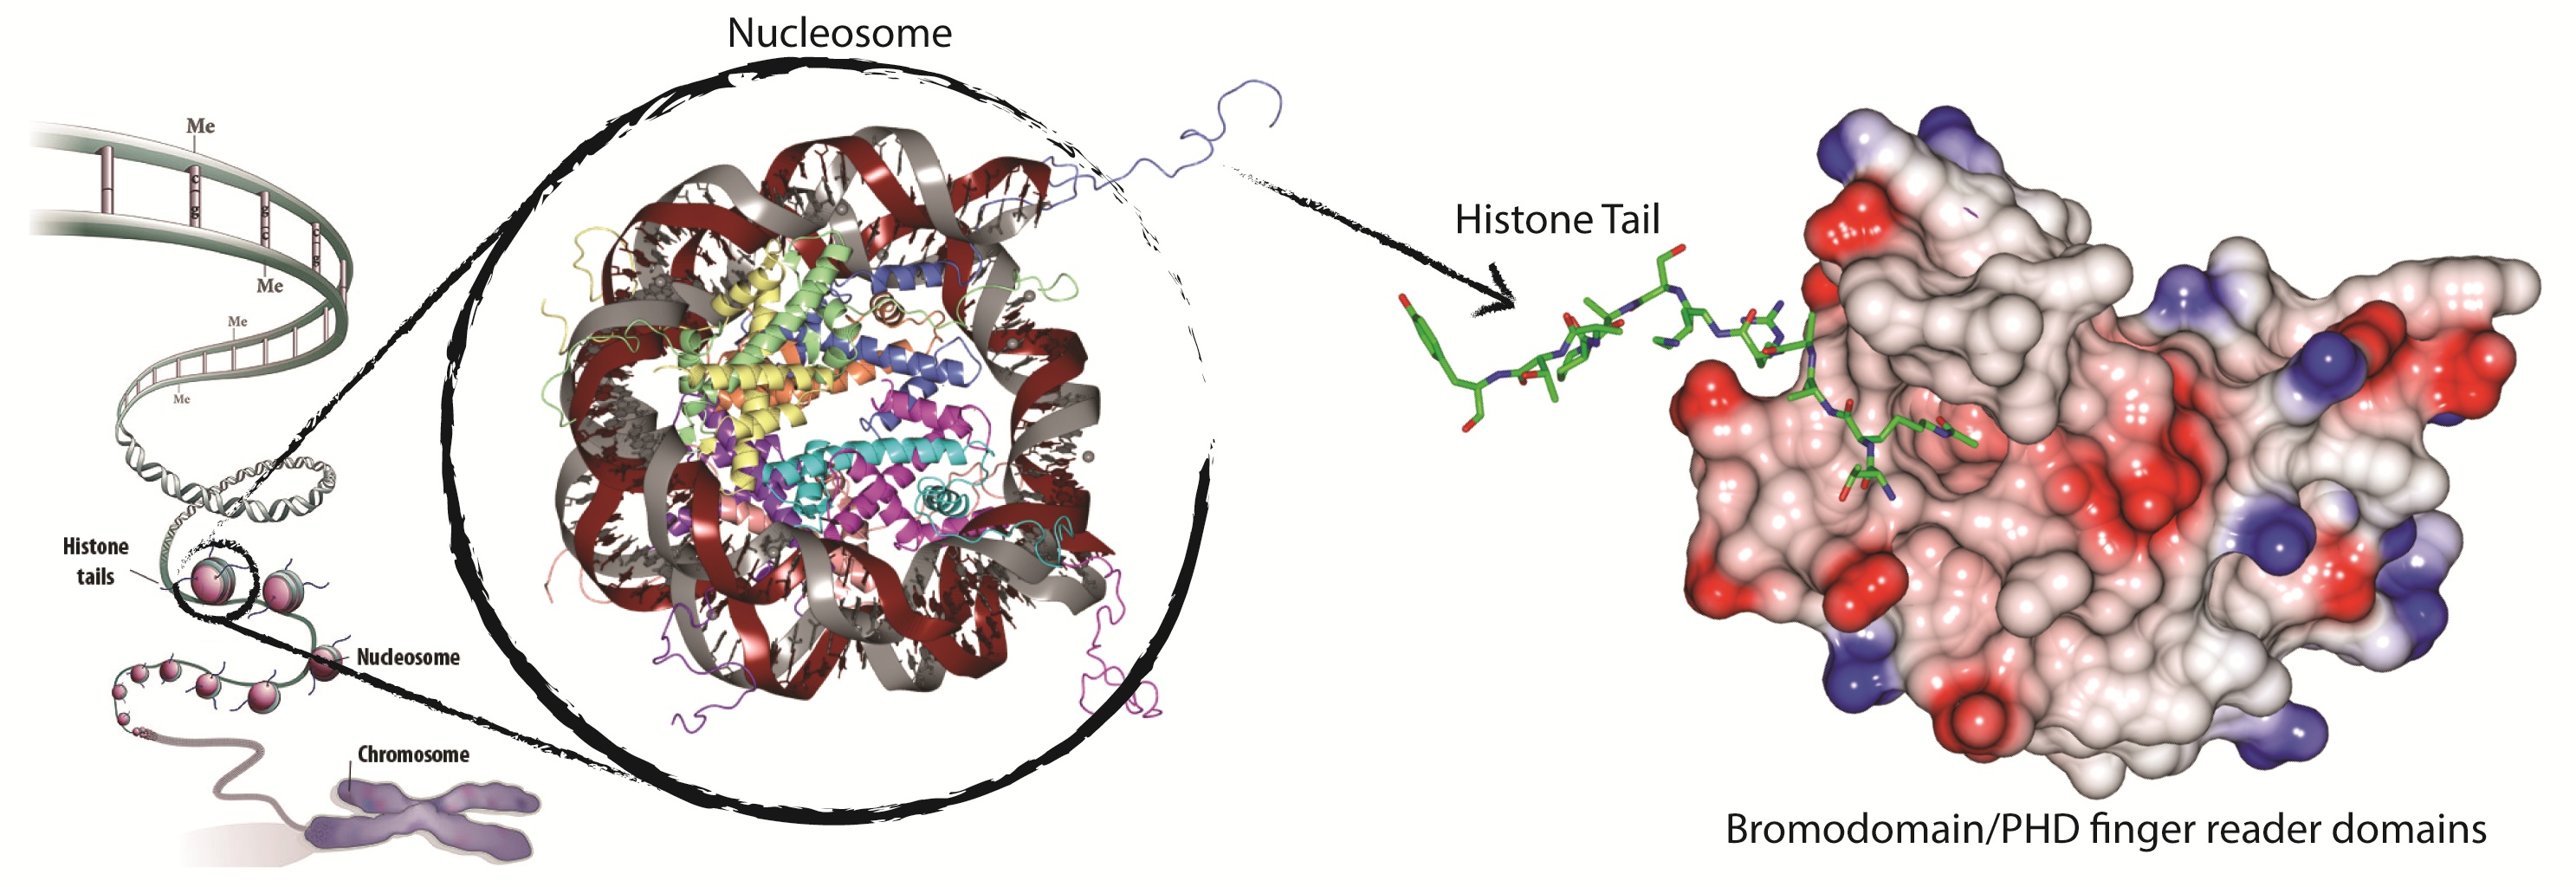 Crystal structures of PHD finger domains with unmodified histone H3 N-terminal tail peptide bound